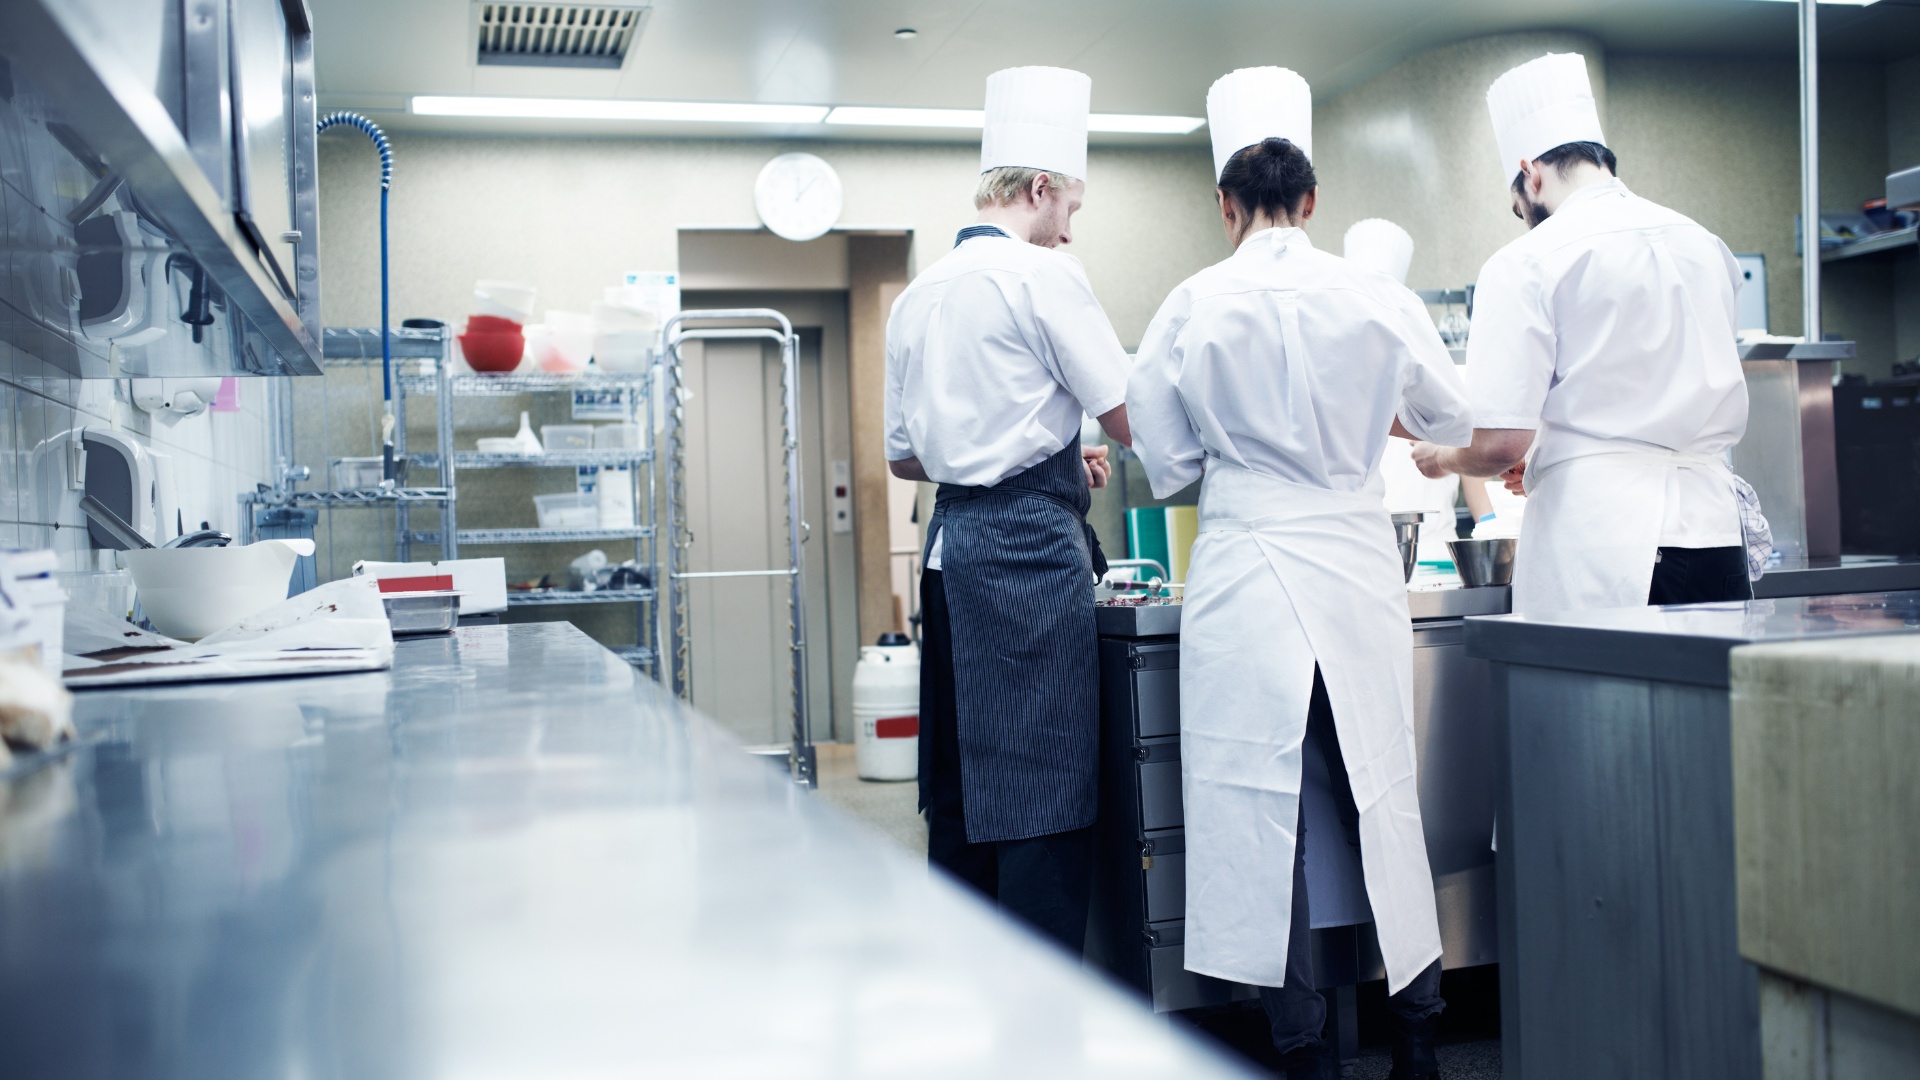 A group of chefs in a kitchen preparing a meal